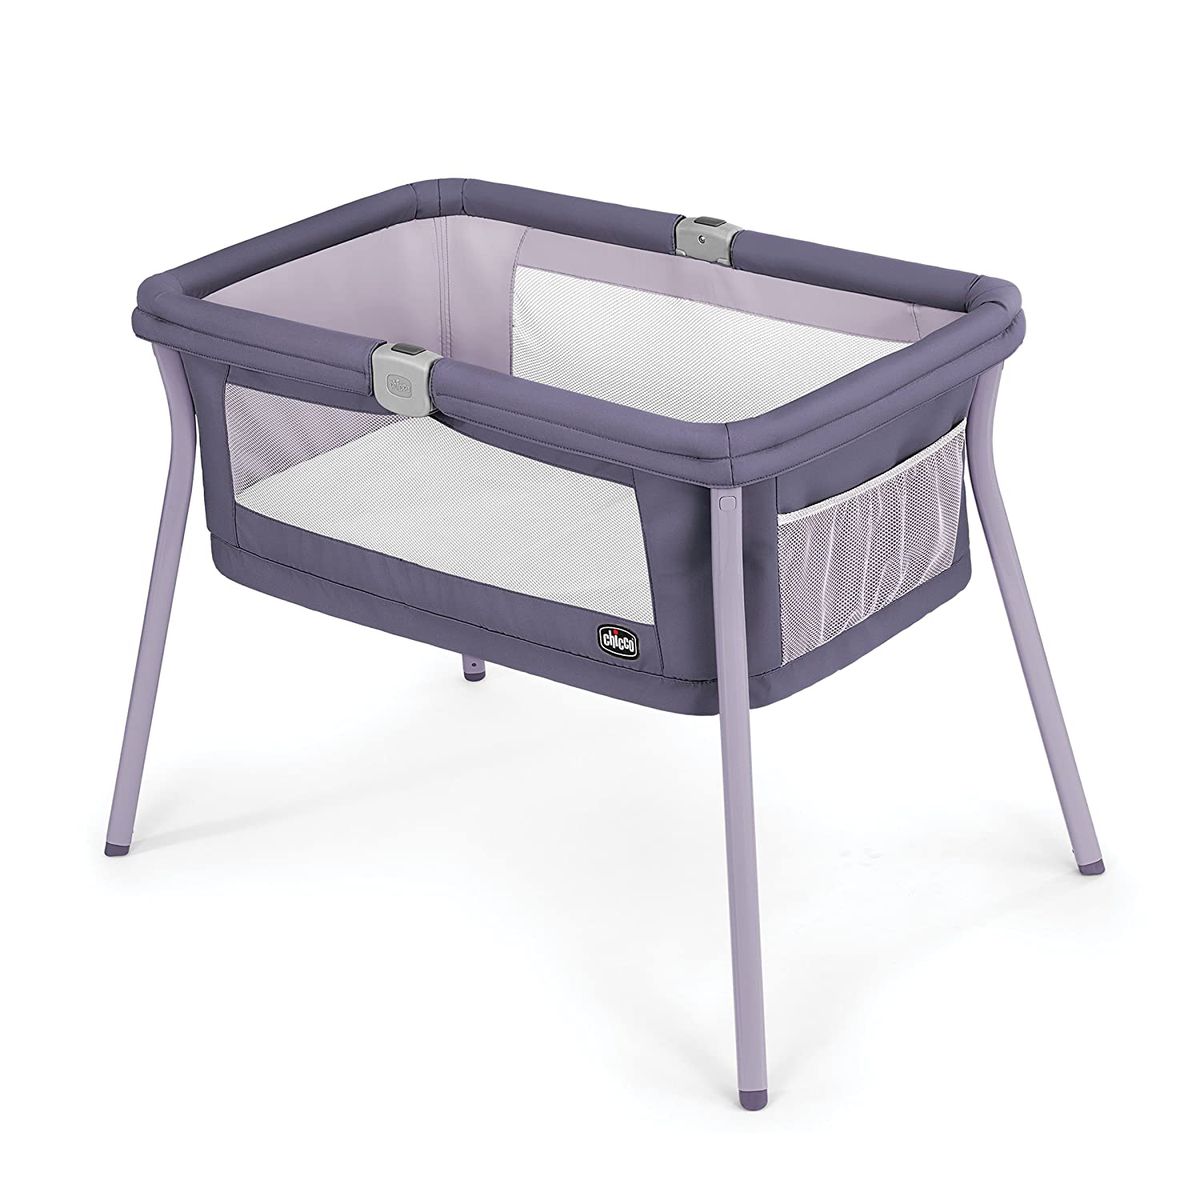 The Best Portable Cribs for Traveling